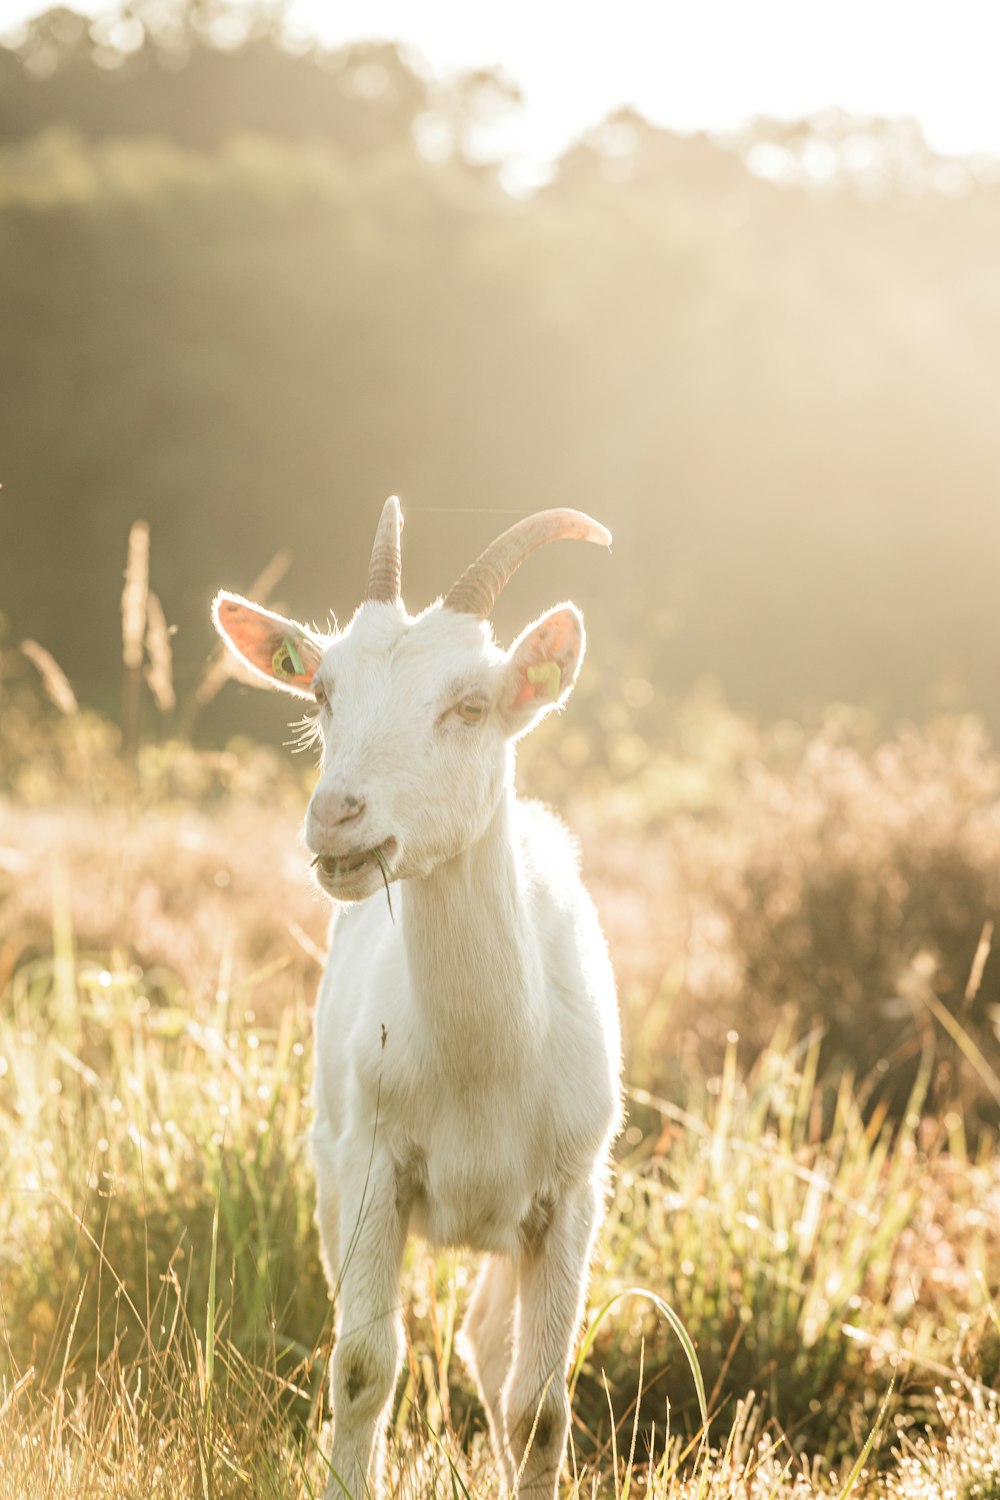 a goat with horns standing in a field